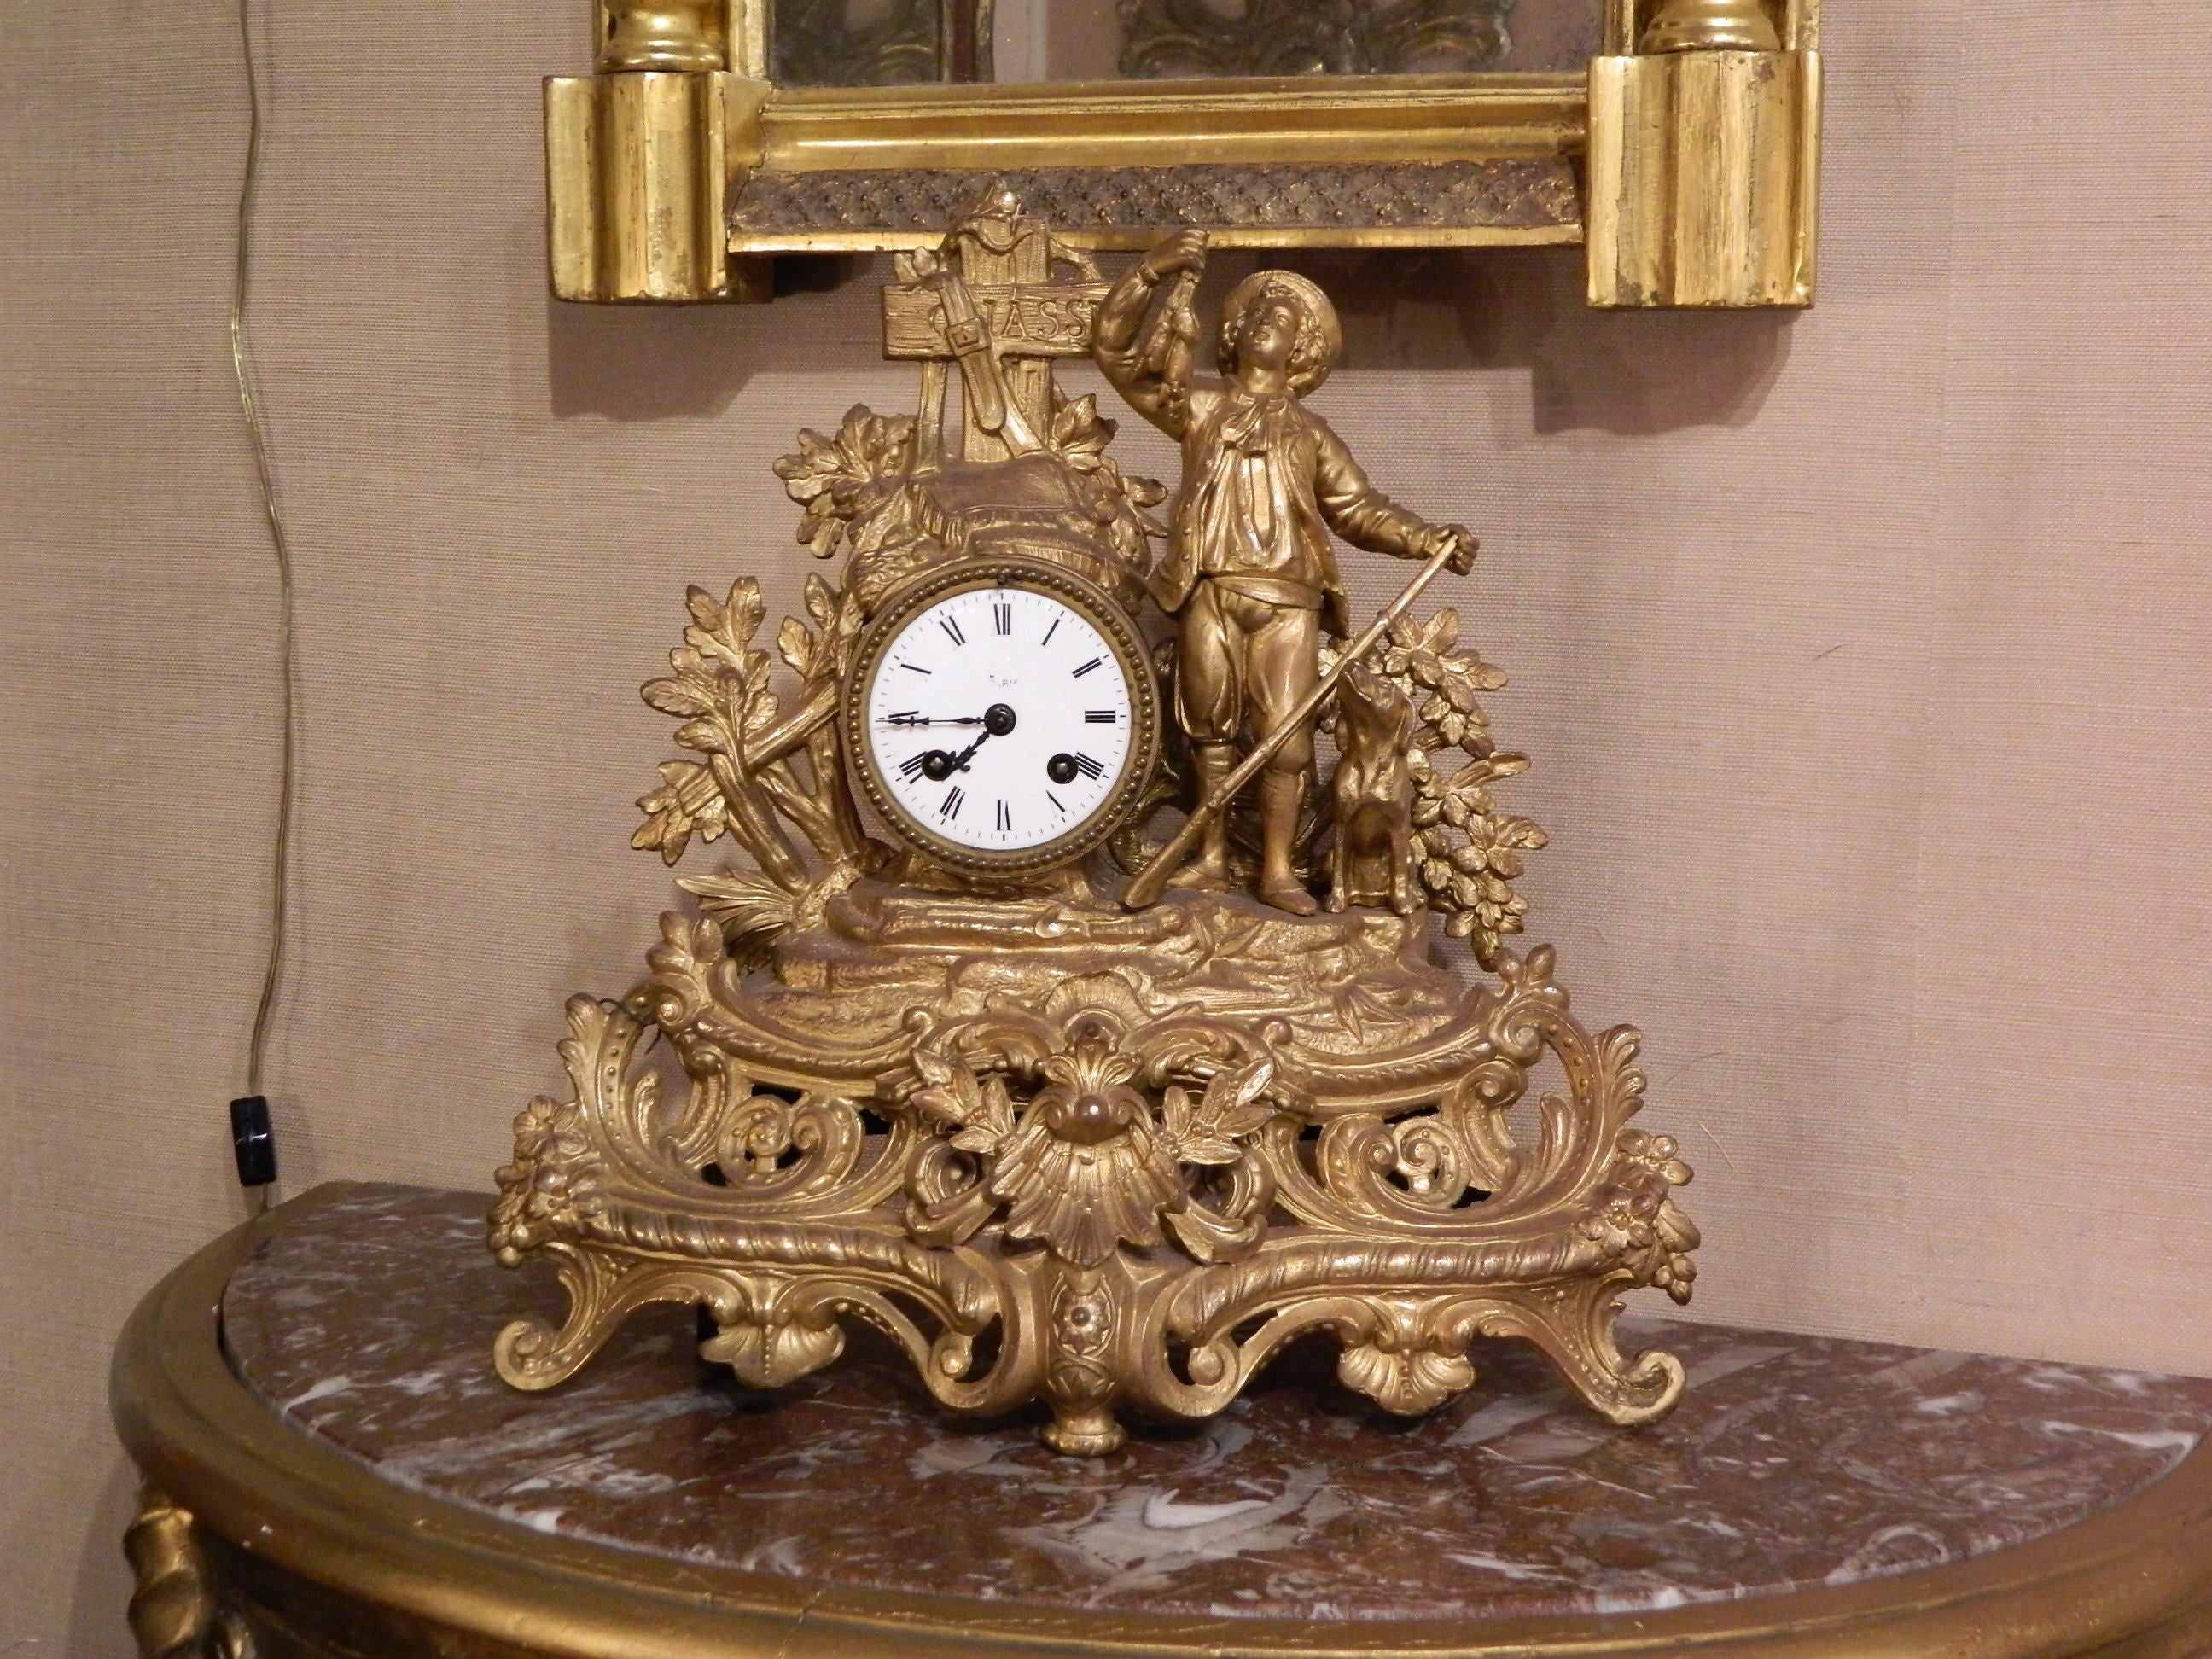 French Gilded Mantel Clock "Man Holding Fowl"